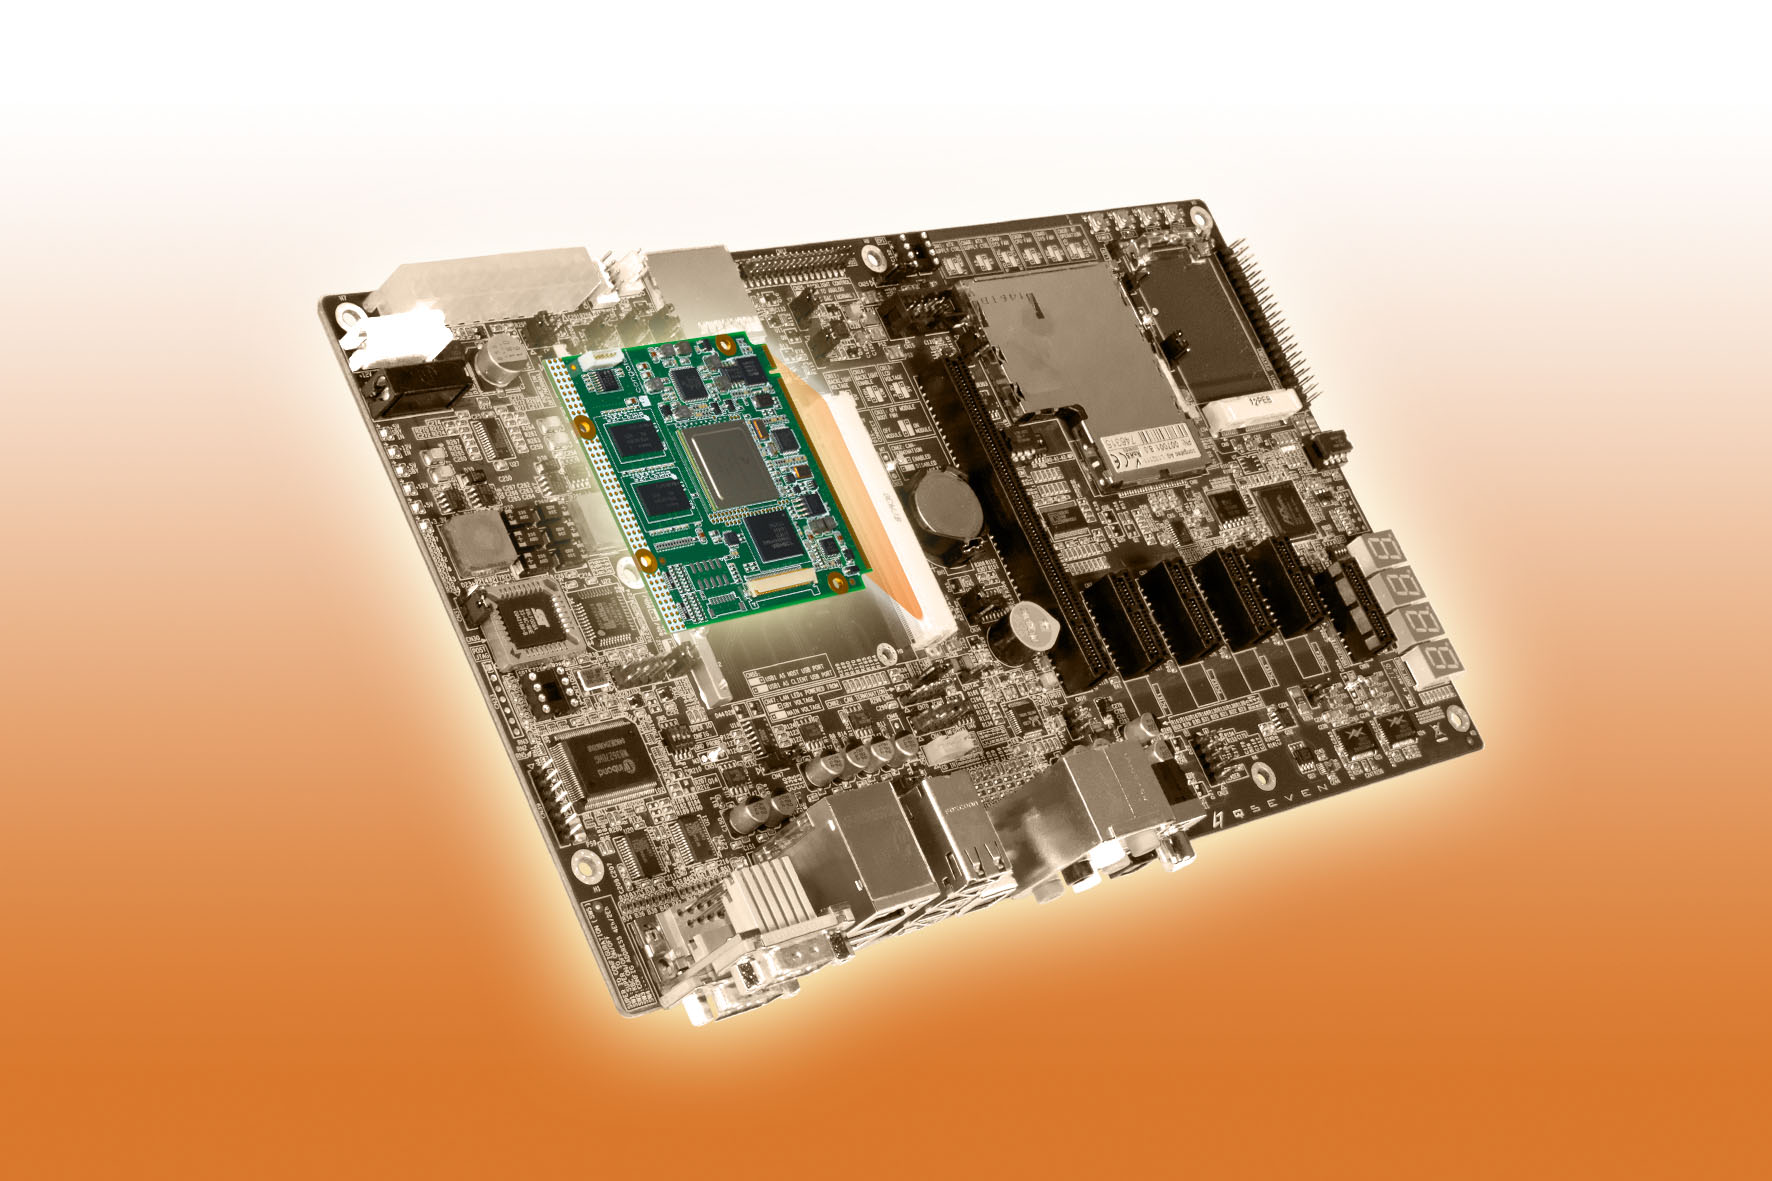 Figure 3: The Qseven ARM Computer-on-Module with development carrier board